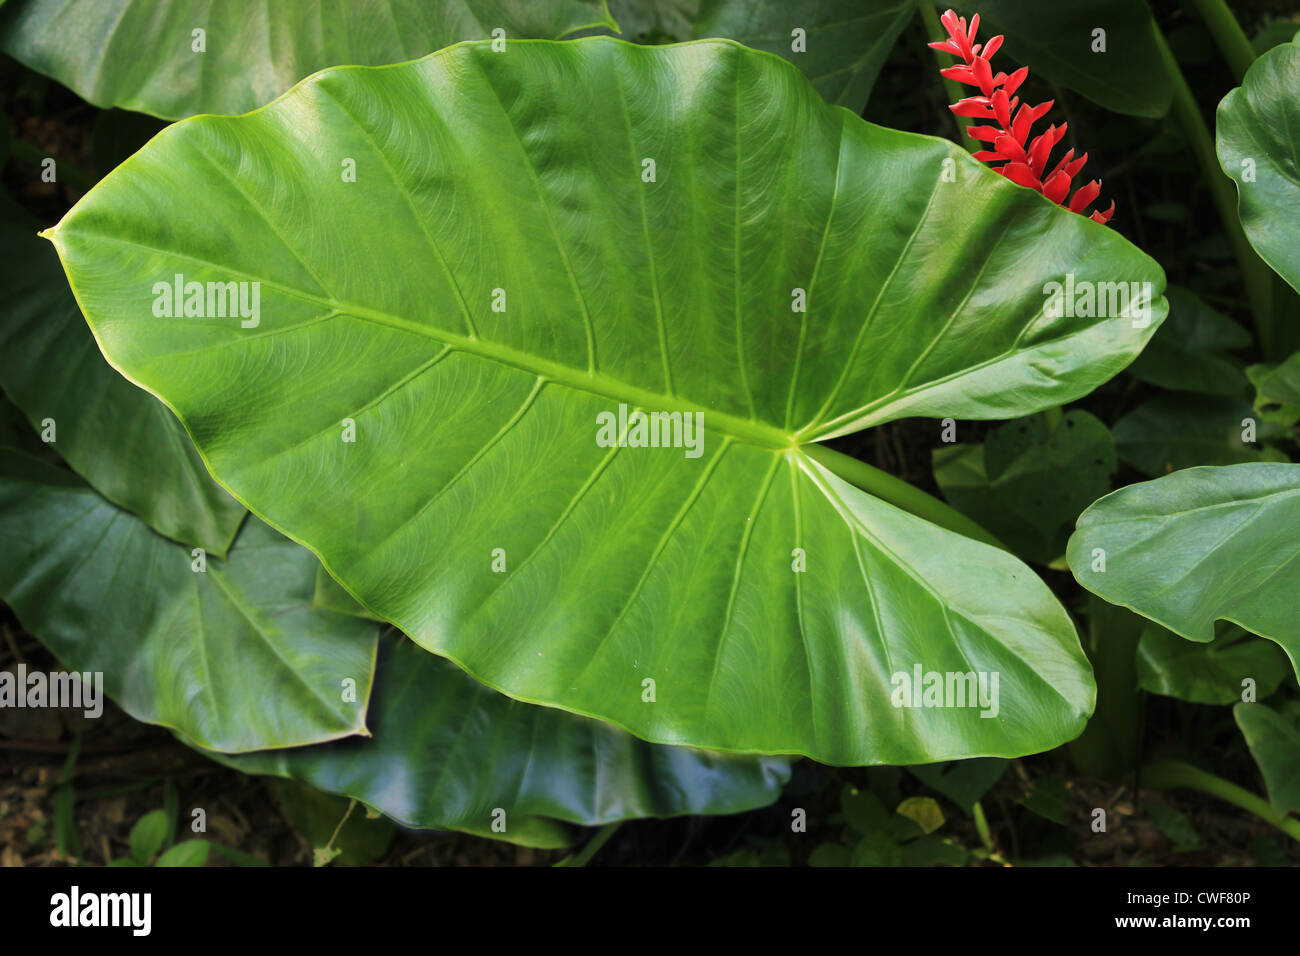 Closeup of tropical plant leaf from above with red flower to side. Stock Photo